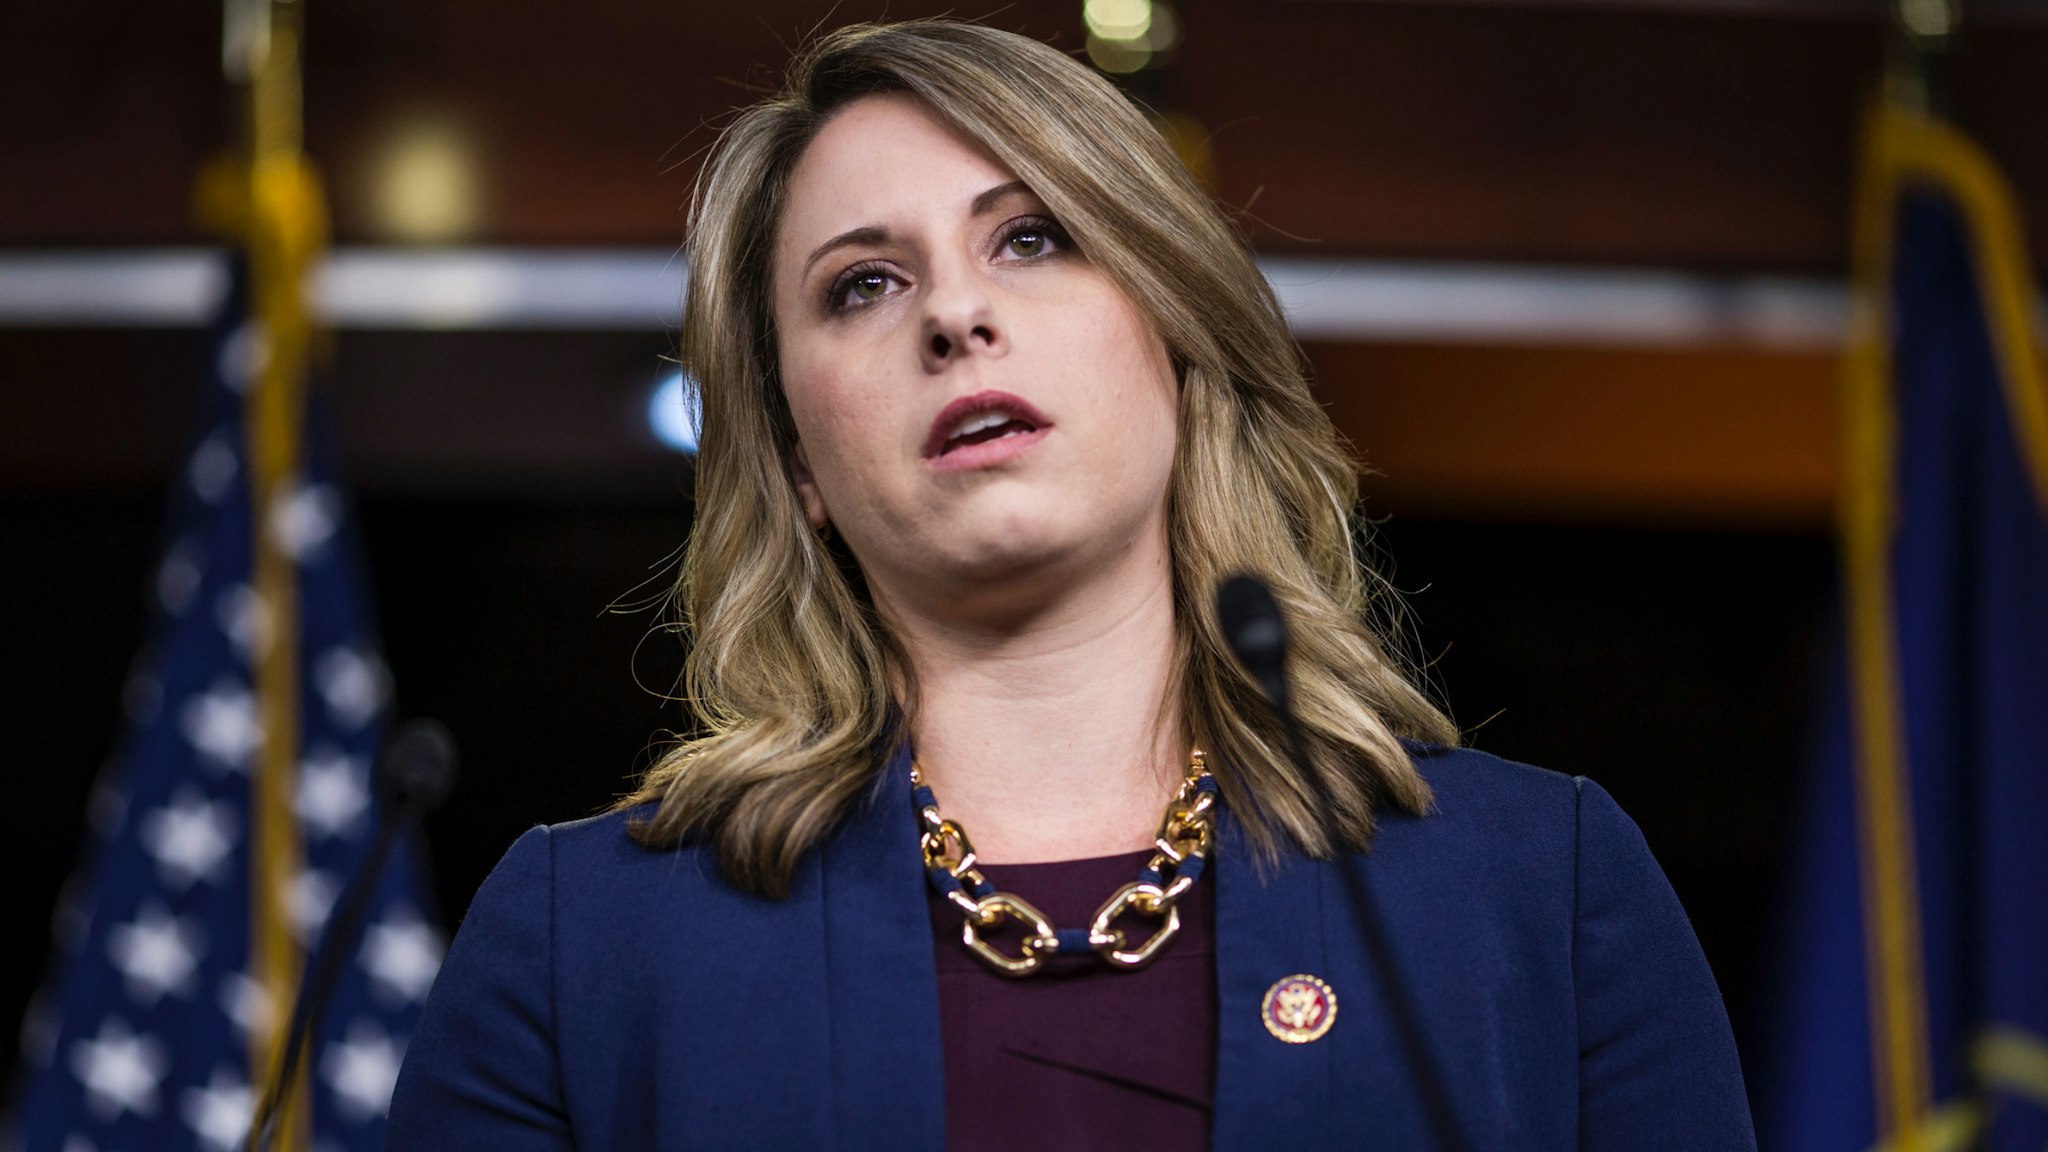 Rep. Katie Hill (D-CA) speaks during a news conference on April 9, 2019 in Washington, DC.